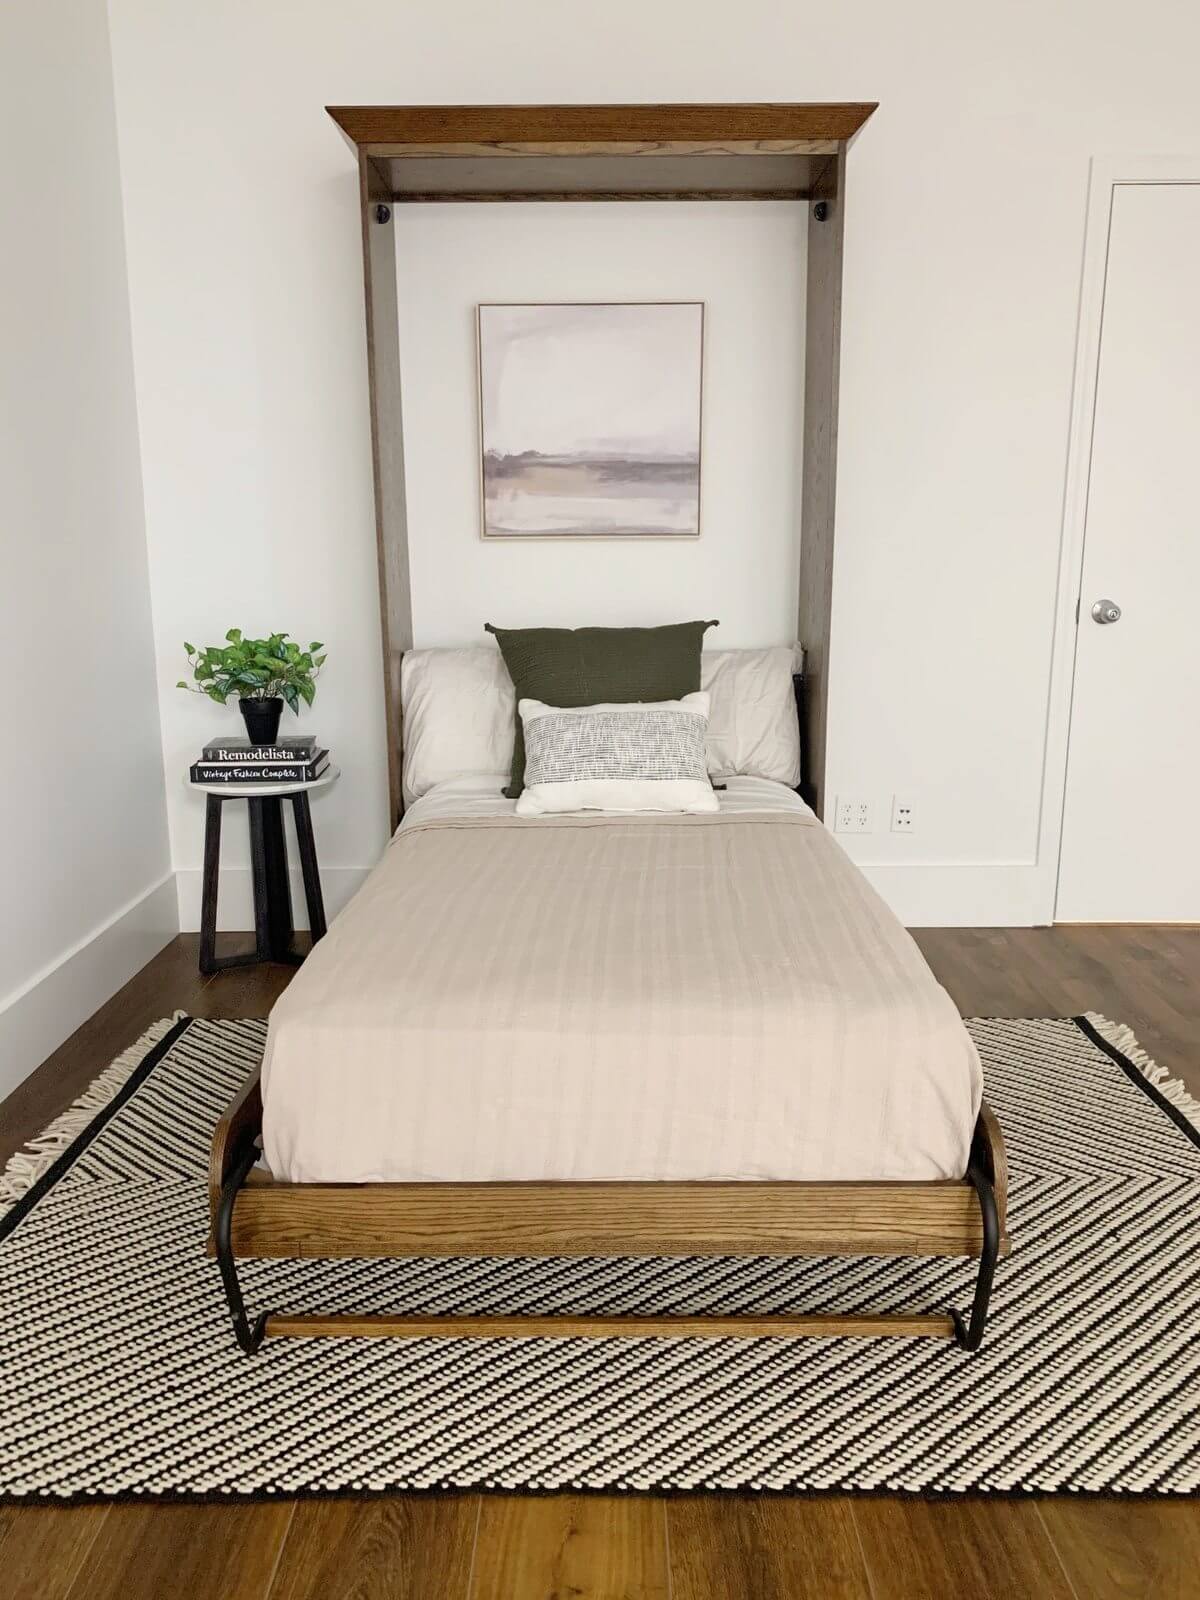 Use your Guest Room as a Gym, Office, or Library by Hiding a Create-A-Bed Murphy Bed in the Wall